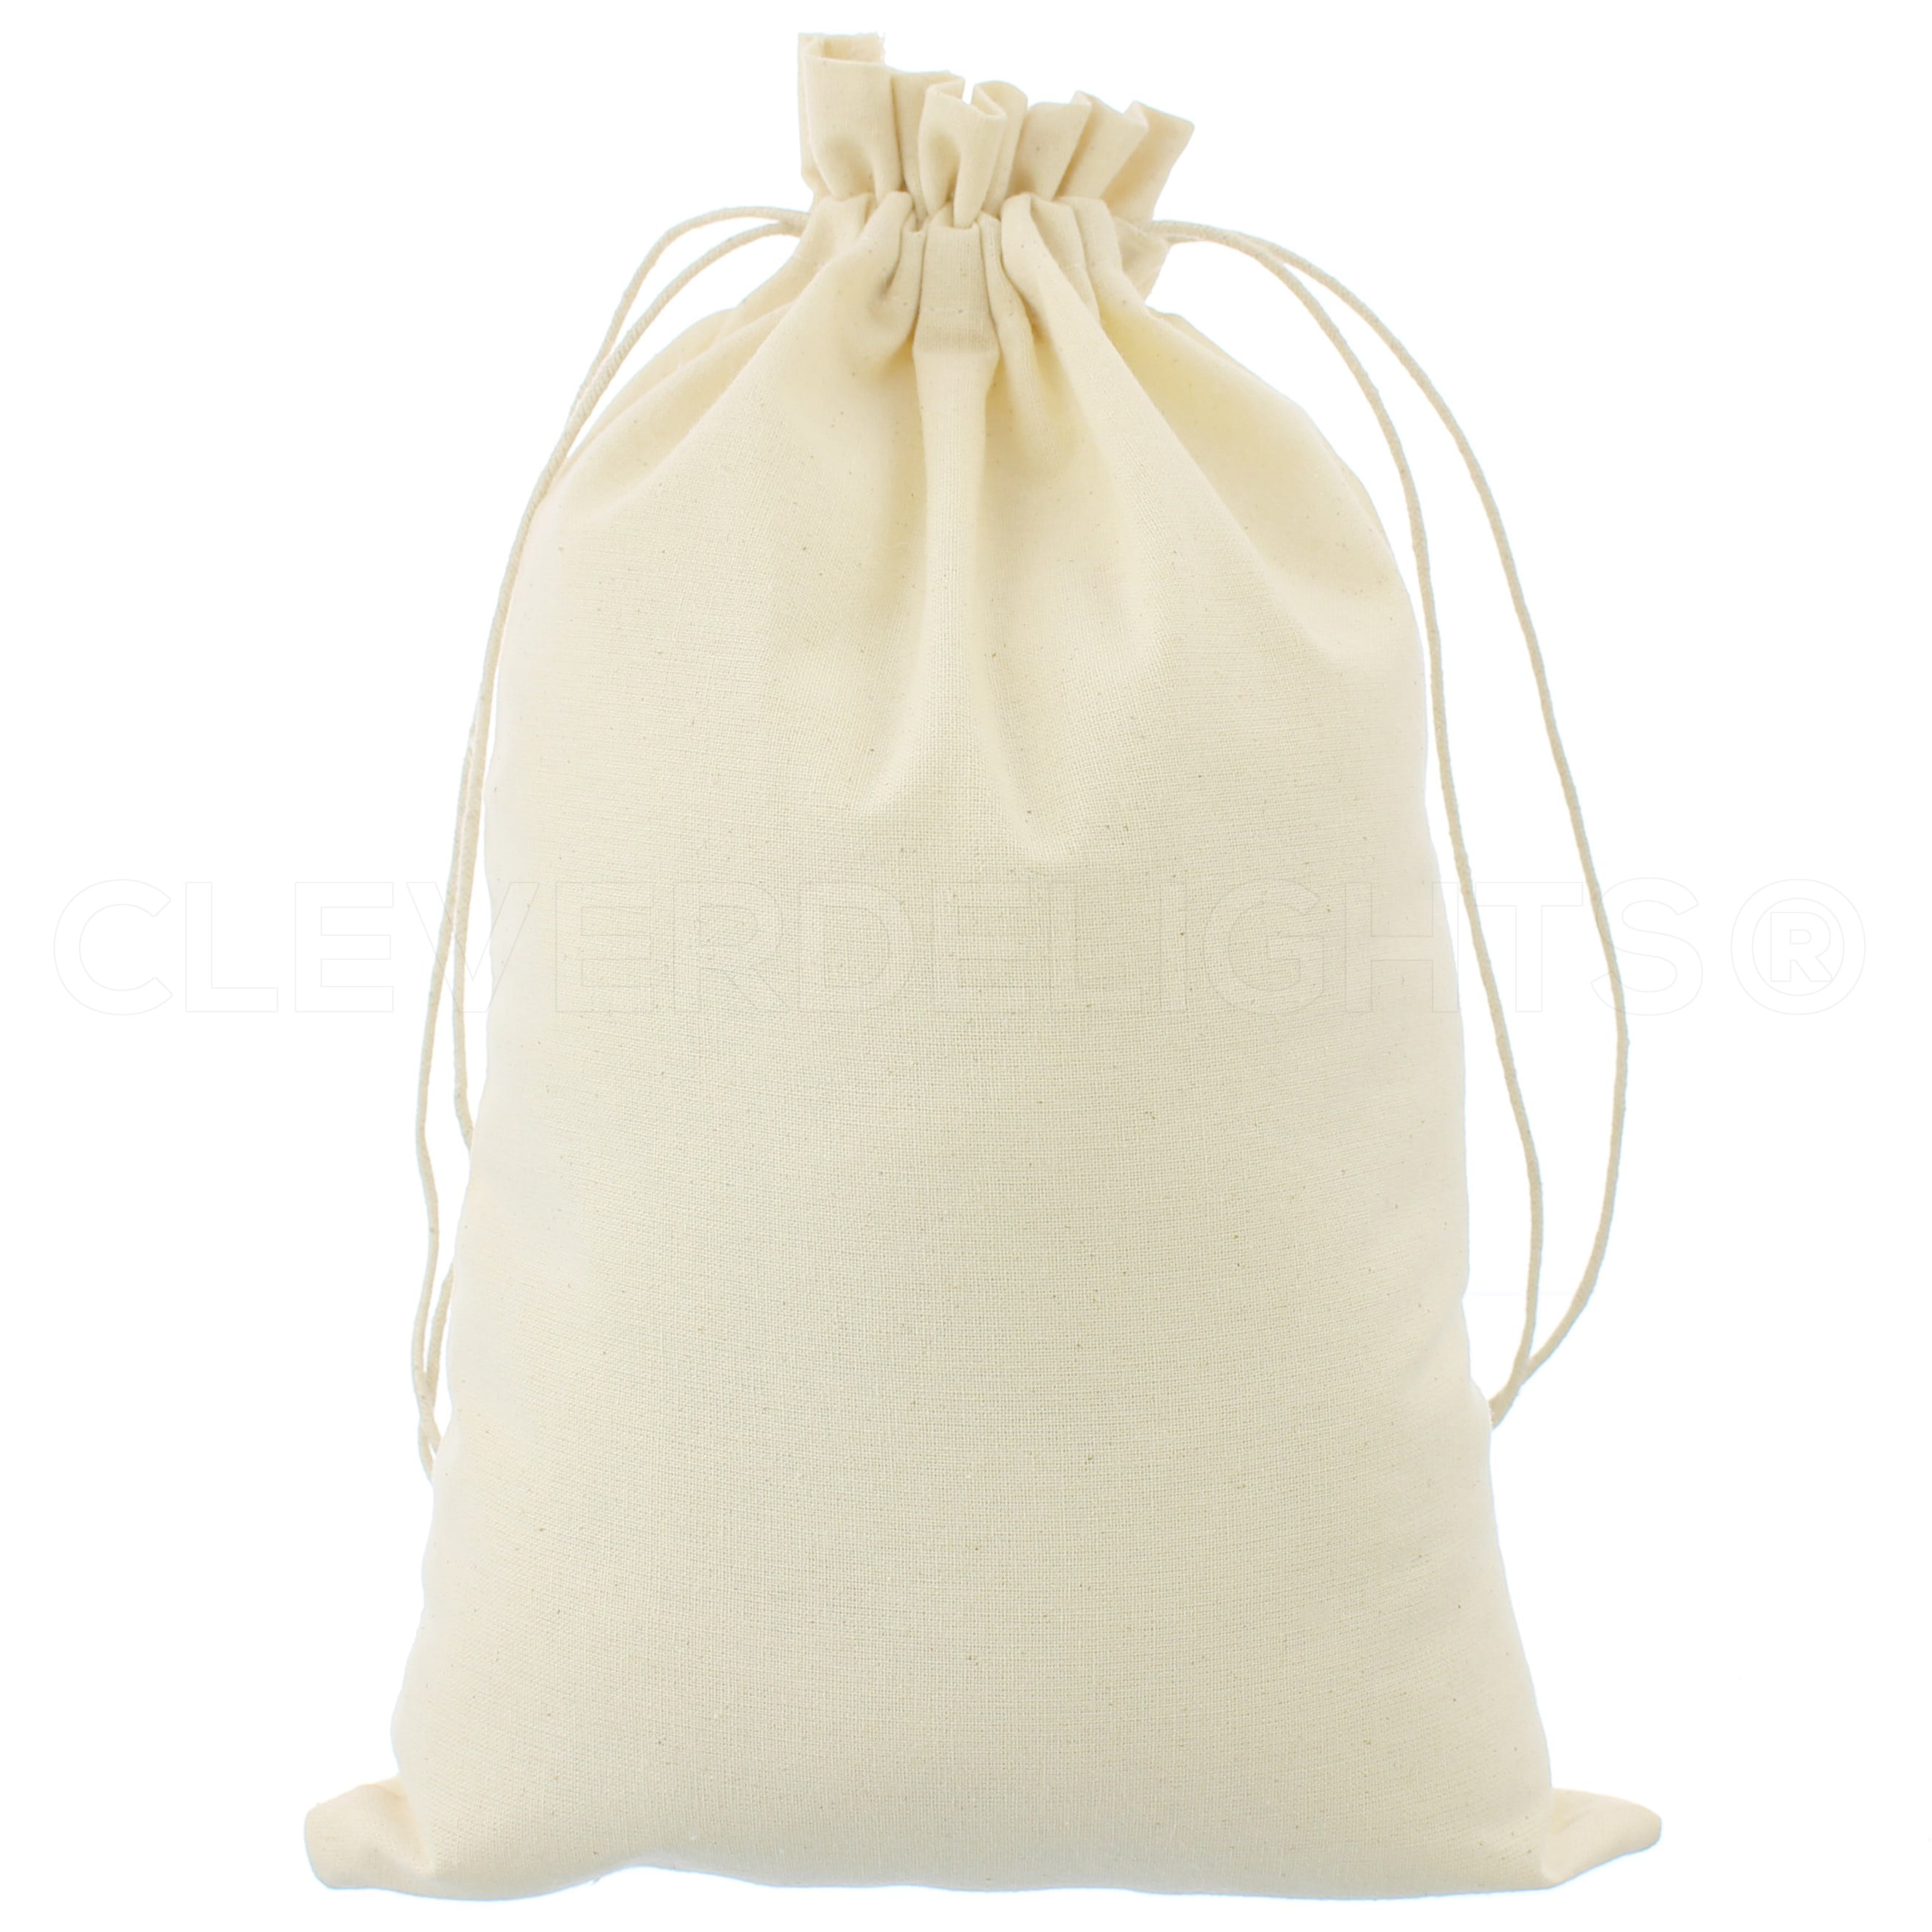 Size 10"x12" inches Natural Cotton Muslin bags *Eco-Friendly* Choose from QTY 